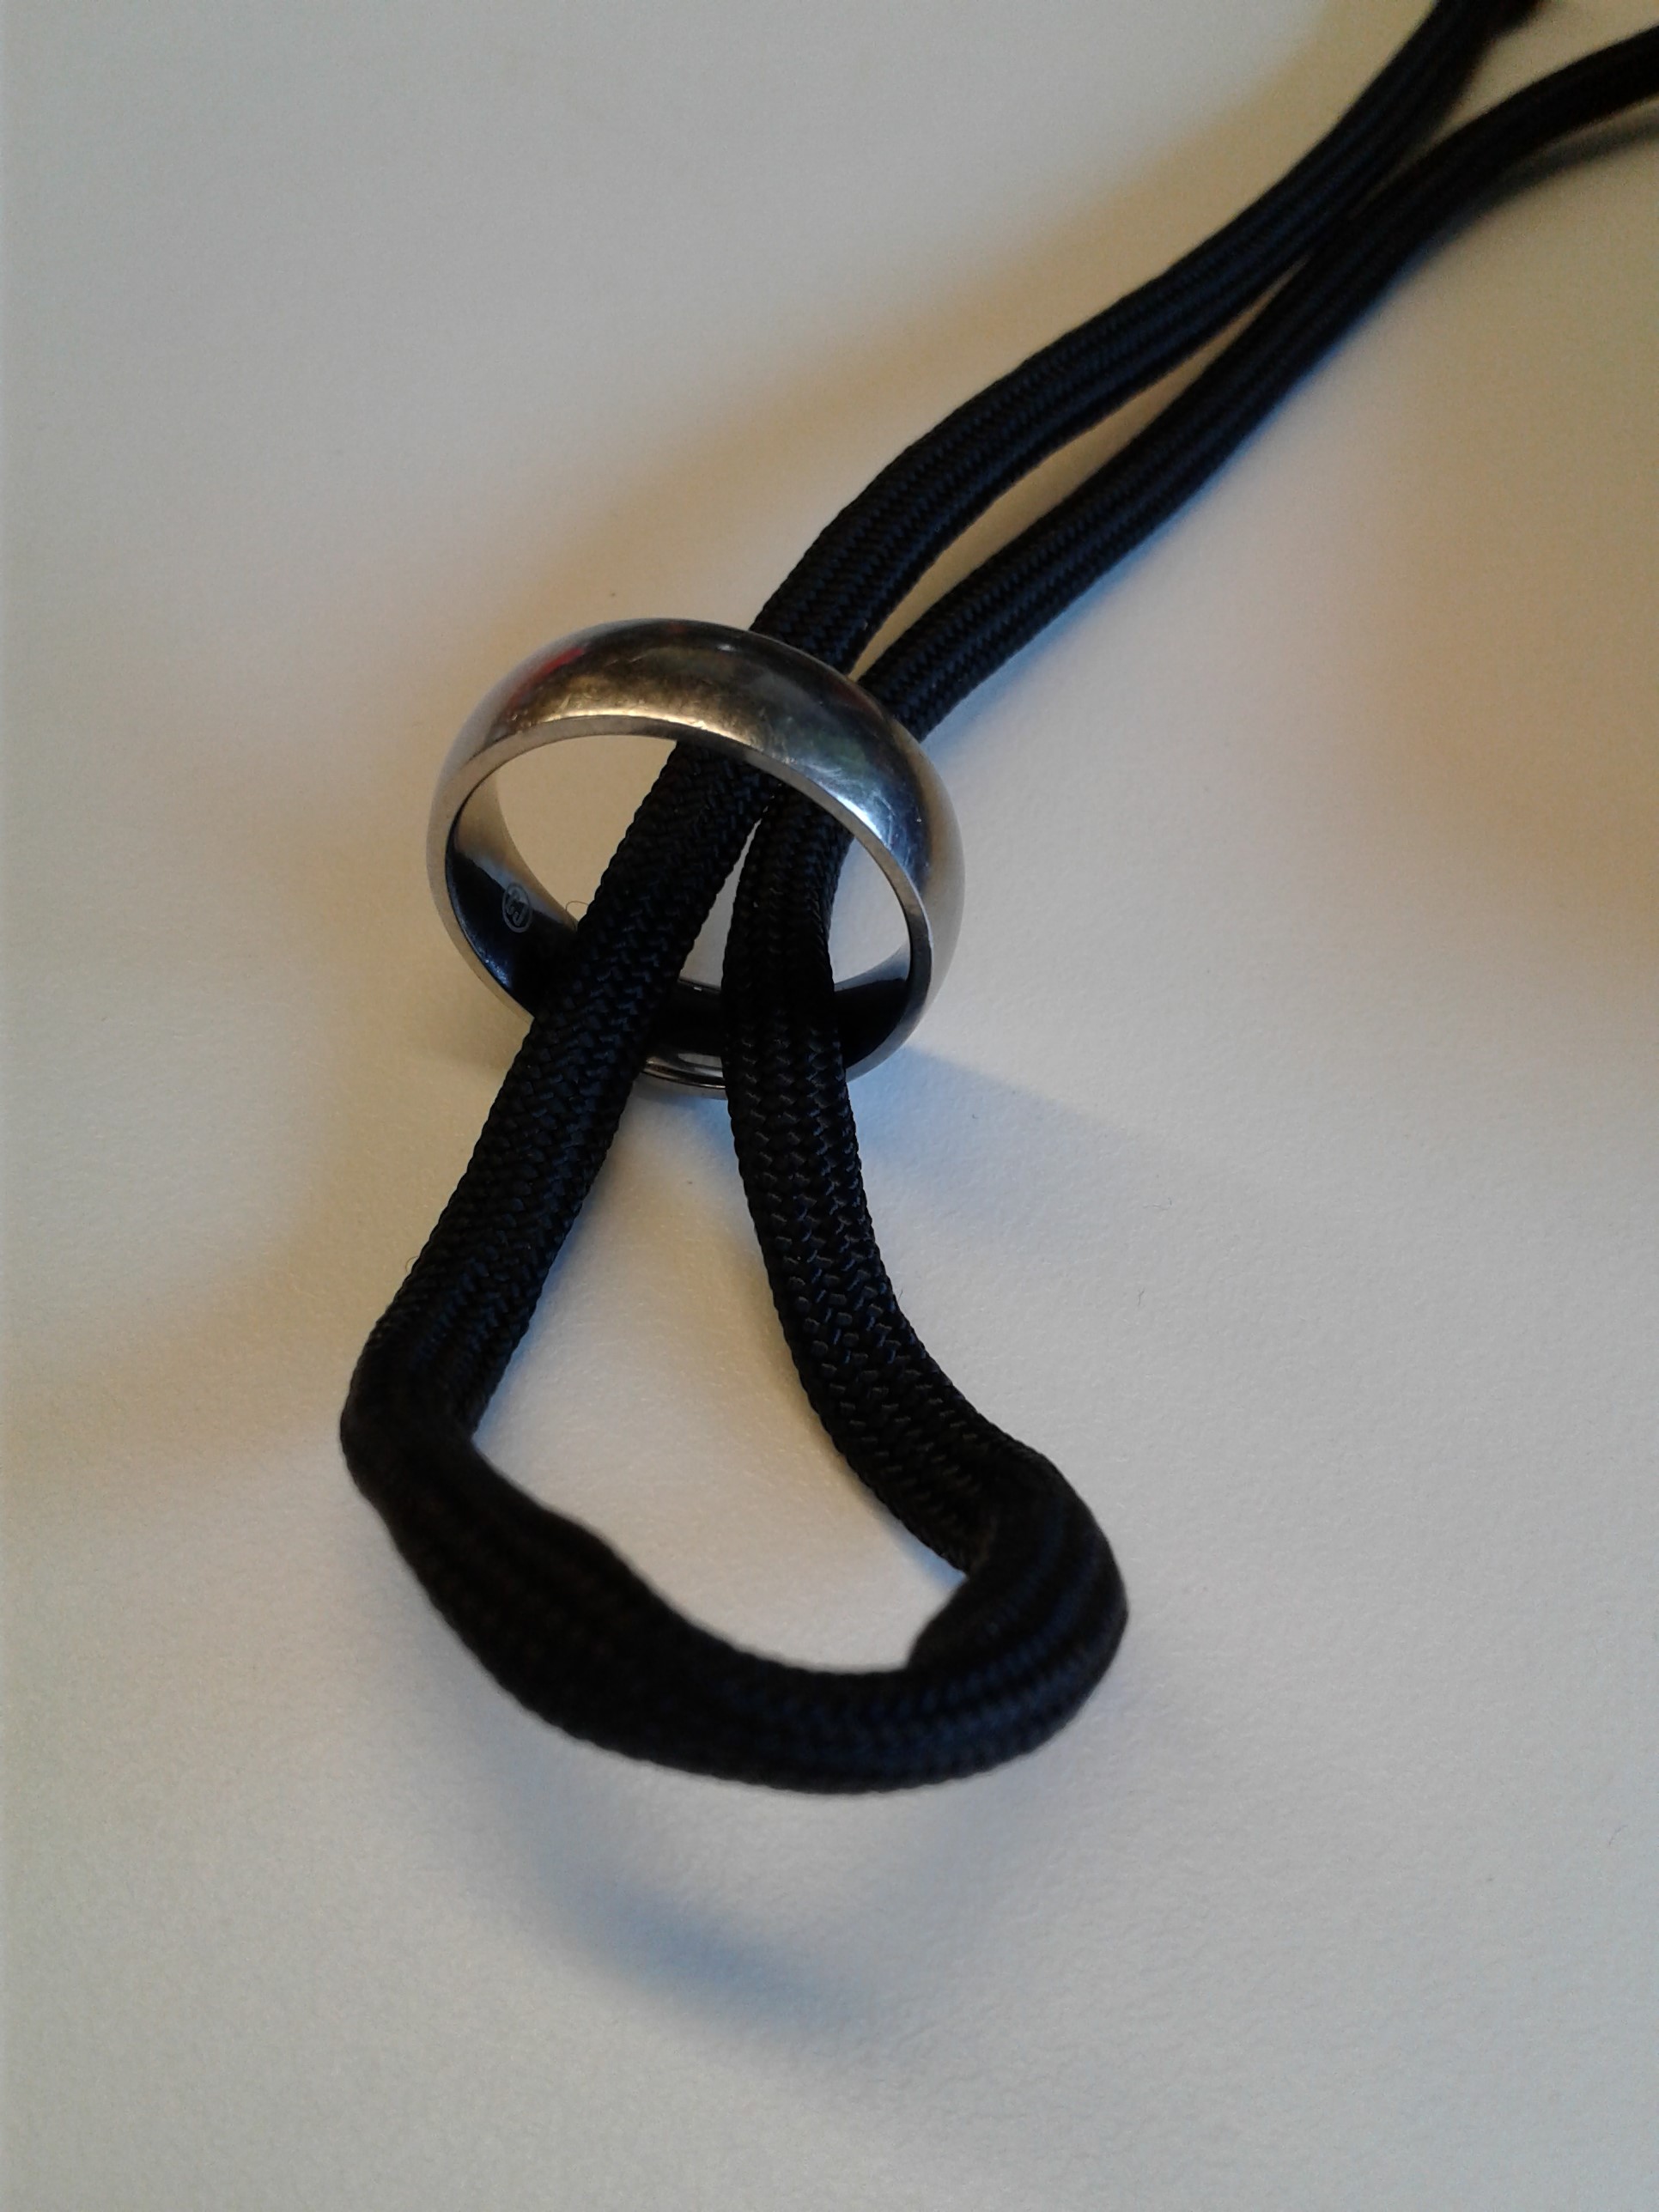 Cow Hitch Knot 1